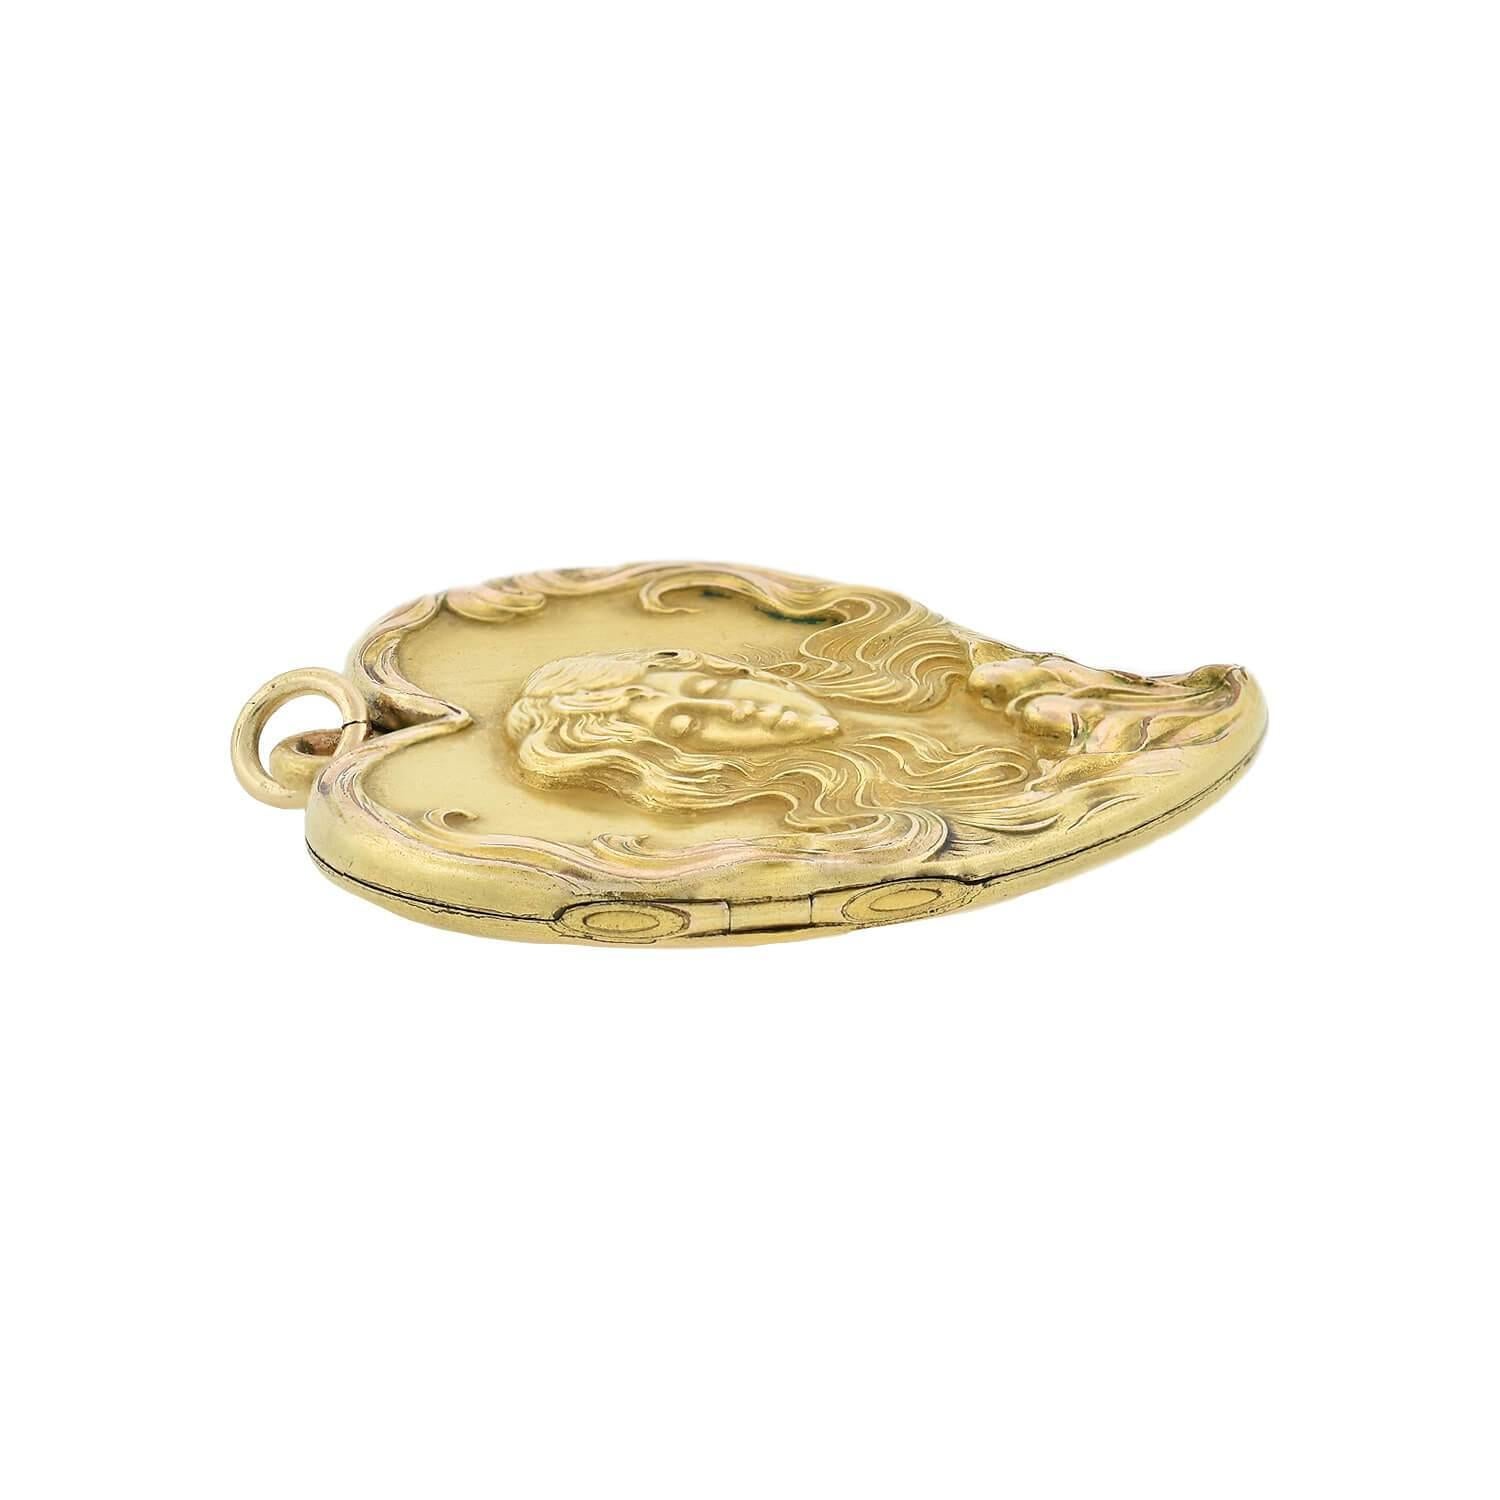 A stunning pendant from the Victorian (ca1890s) era! Crafted in 14kt yellow gold, a maiden adorns the top of this Witch's Heart locket. Her hair curls to create the heart's border, and two flowers sprout from the tip of the heart. The flowers may be